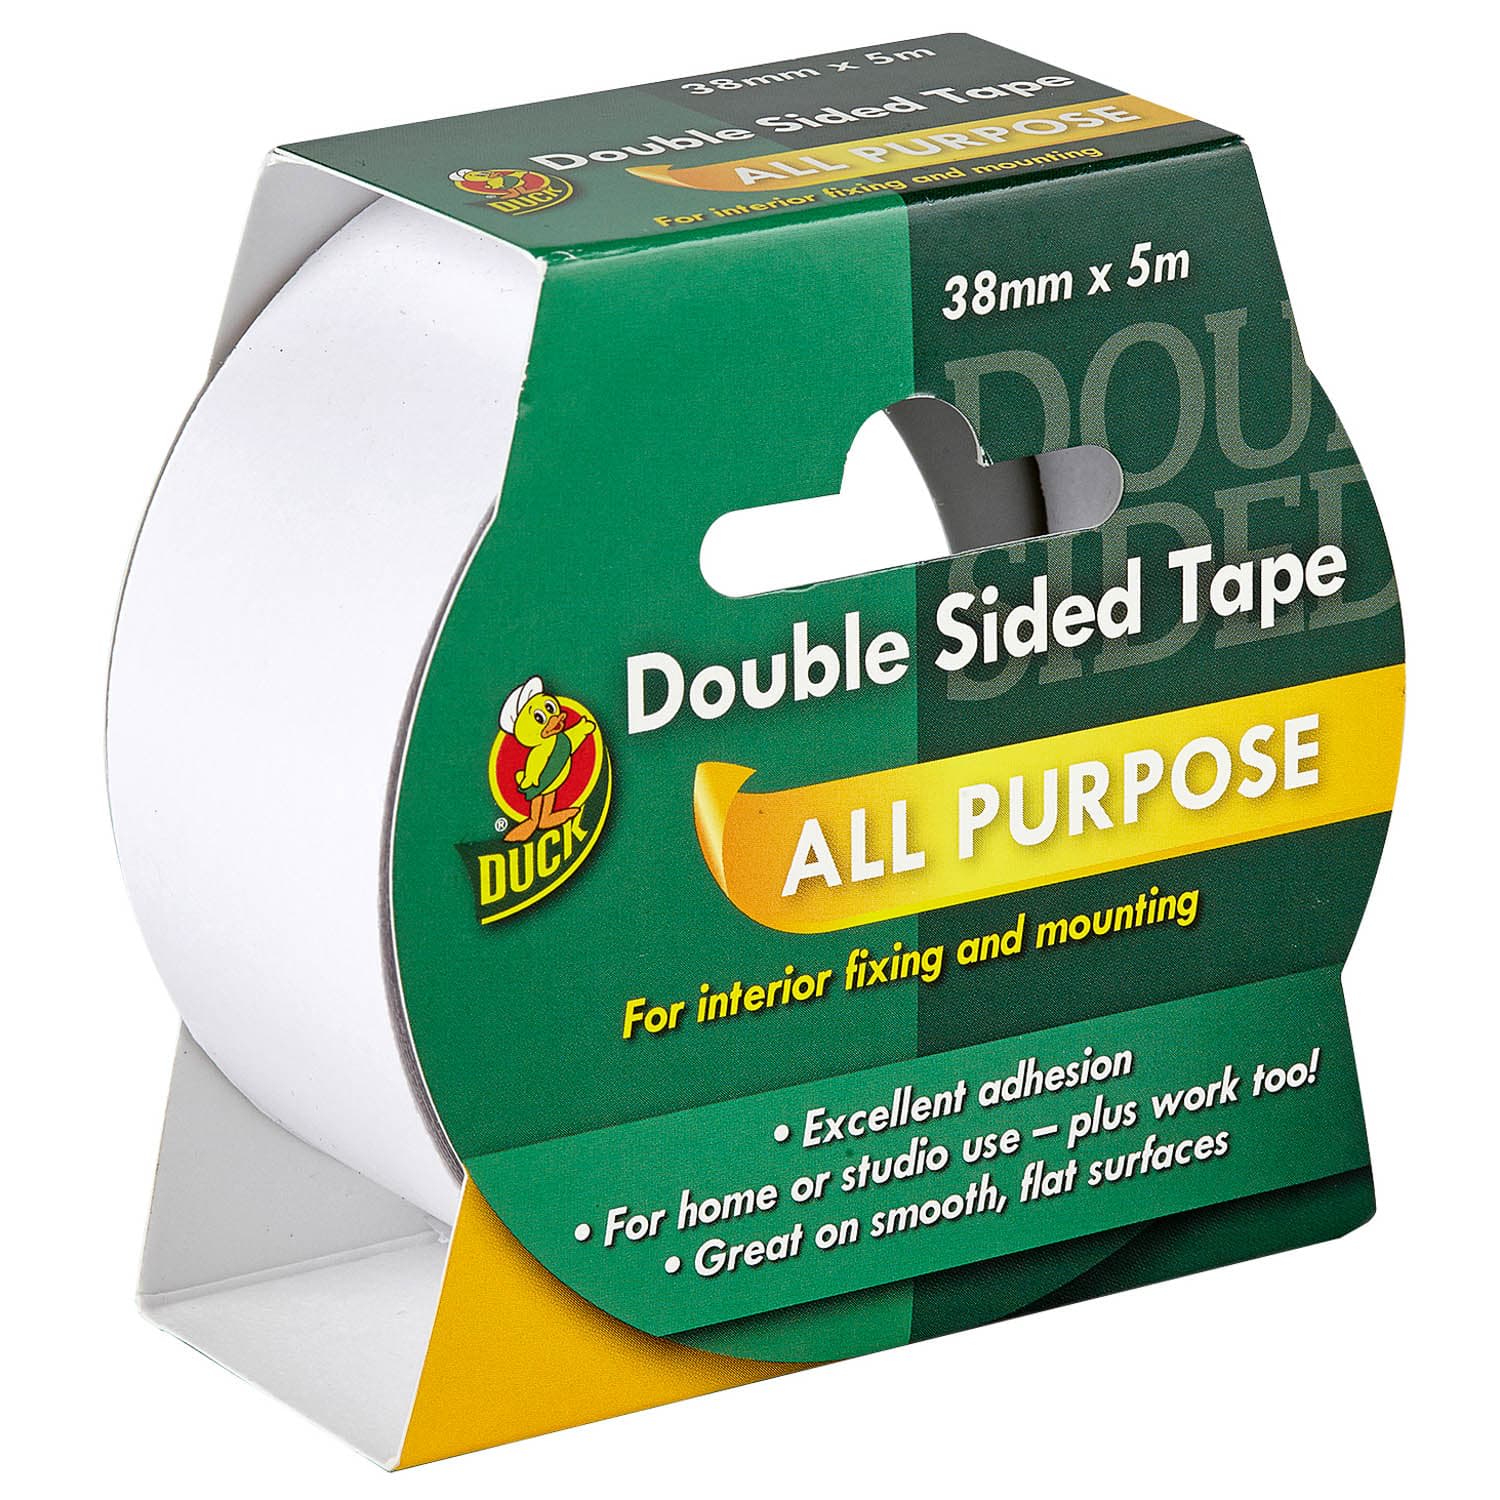 Duck Double-Sided All Purpose Tape 38mm x 5m